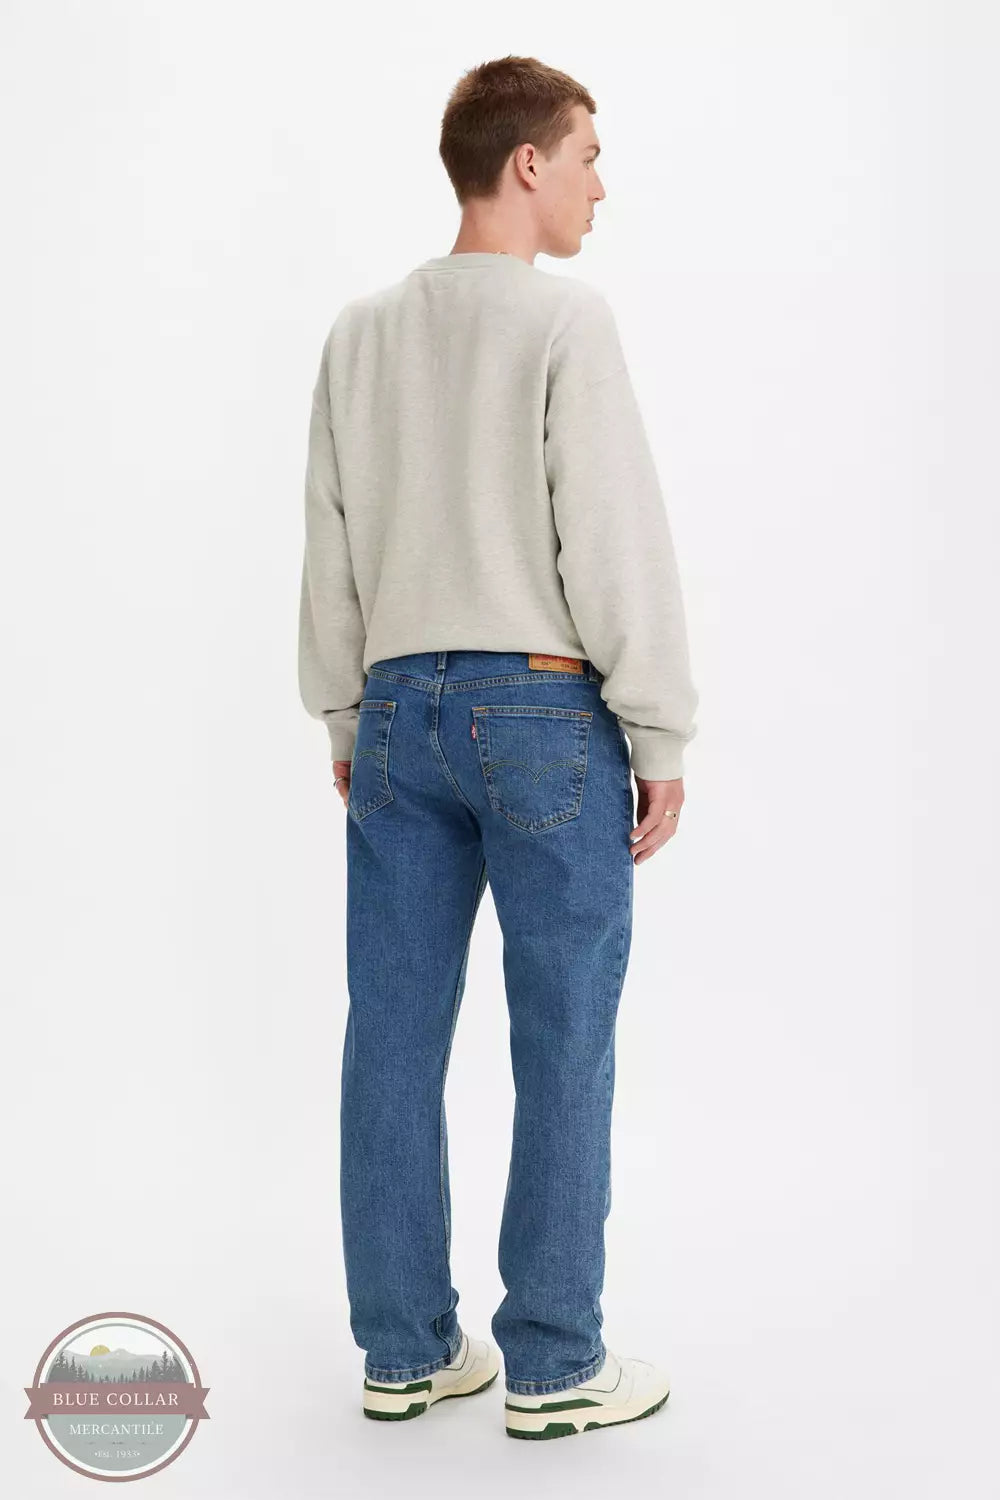 Levi's 514-0831 514 Straight Regular Fit Jeans in Stonewash Stretch Back View